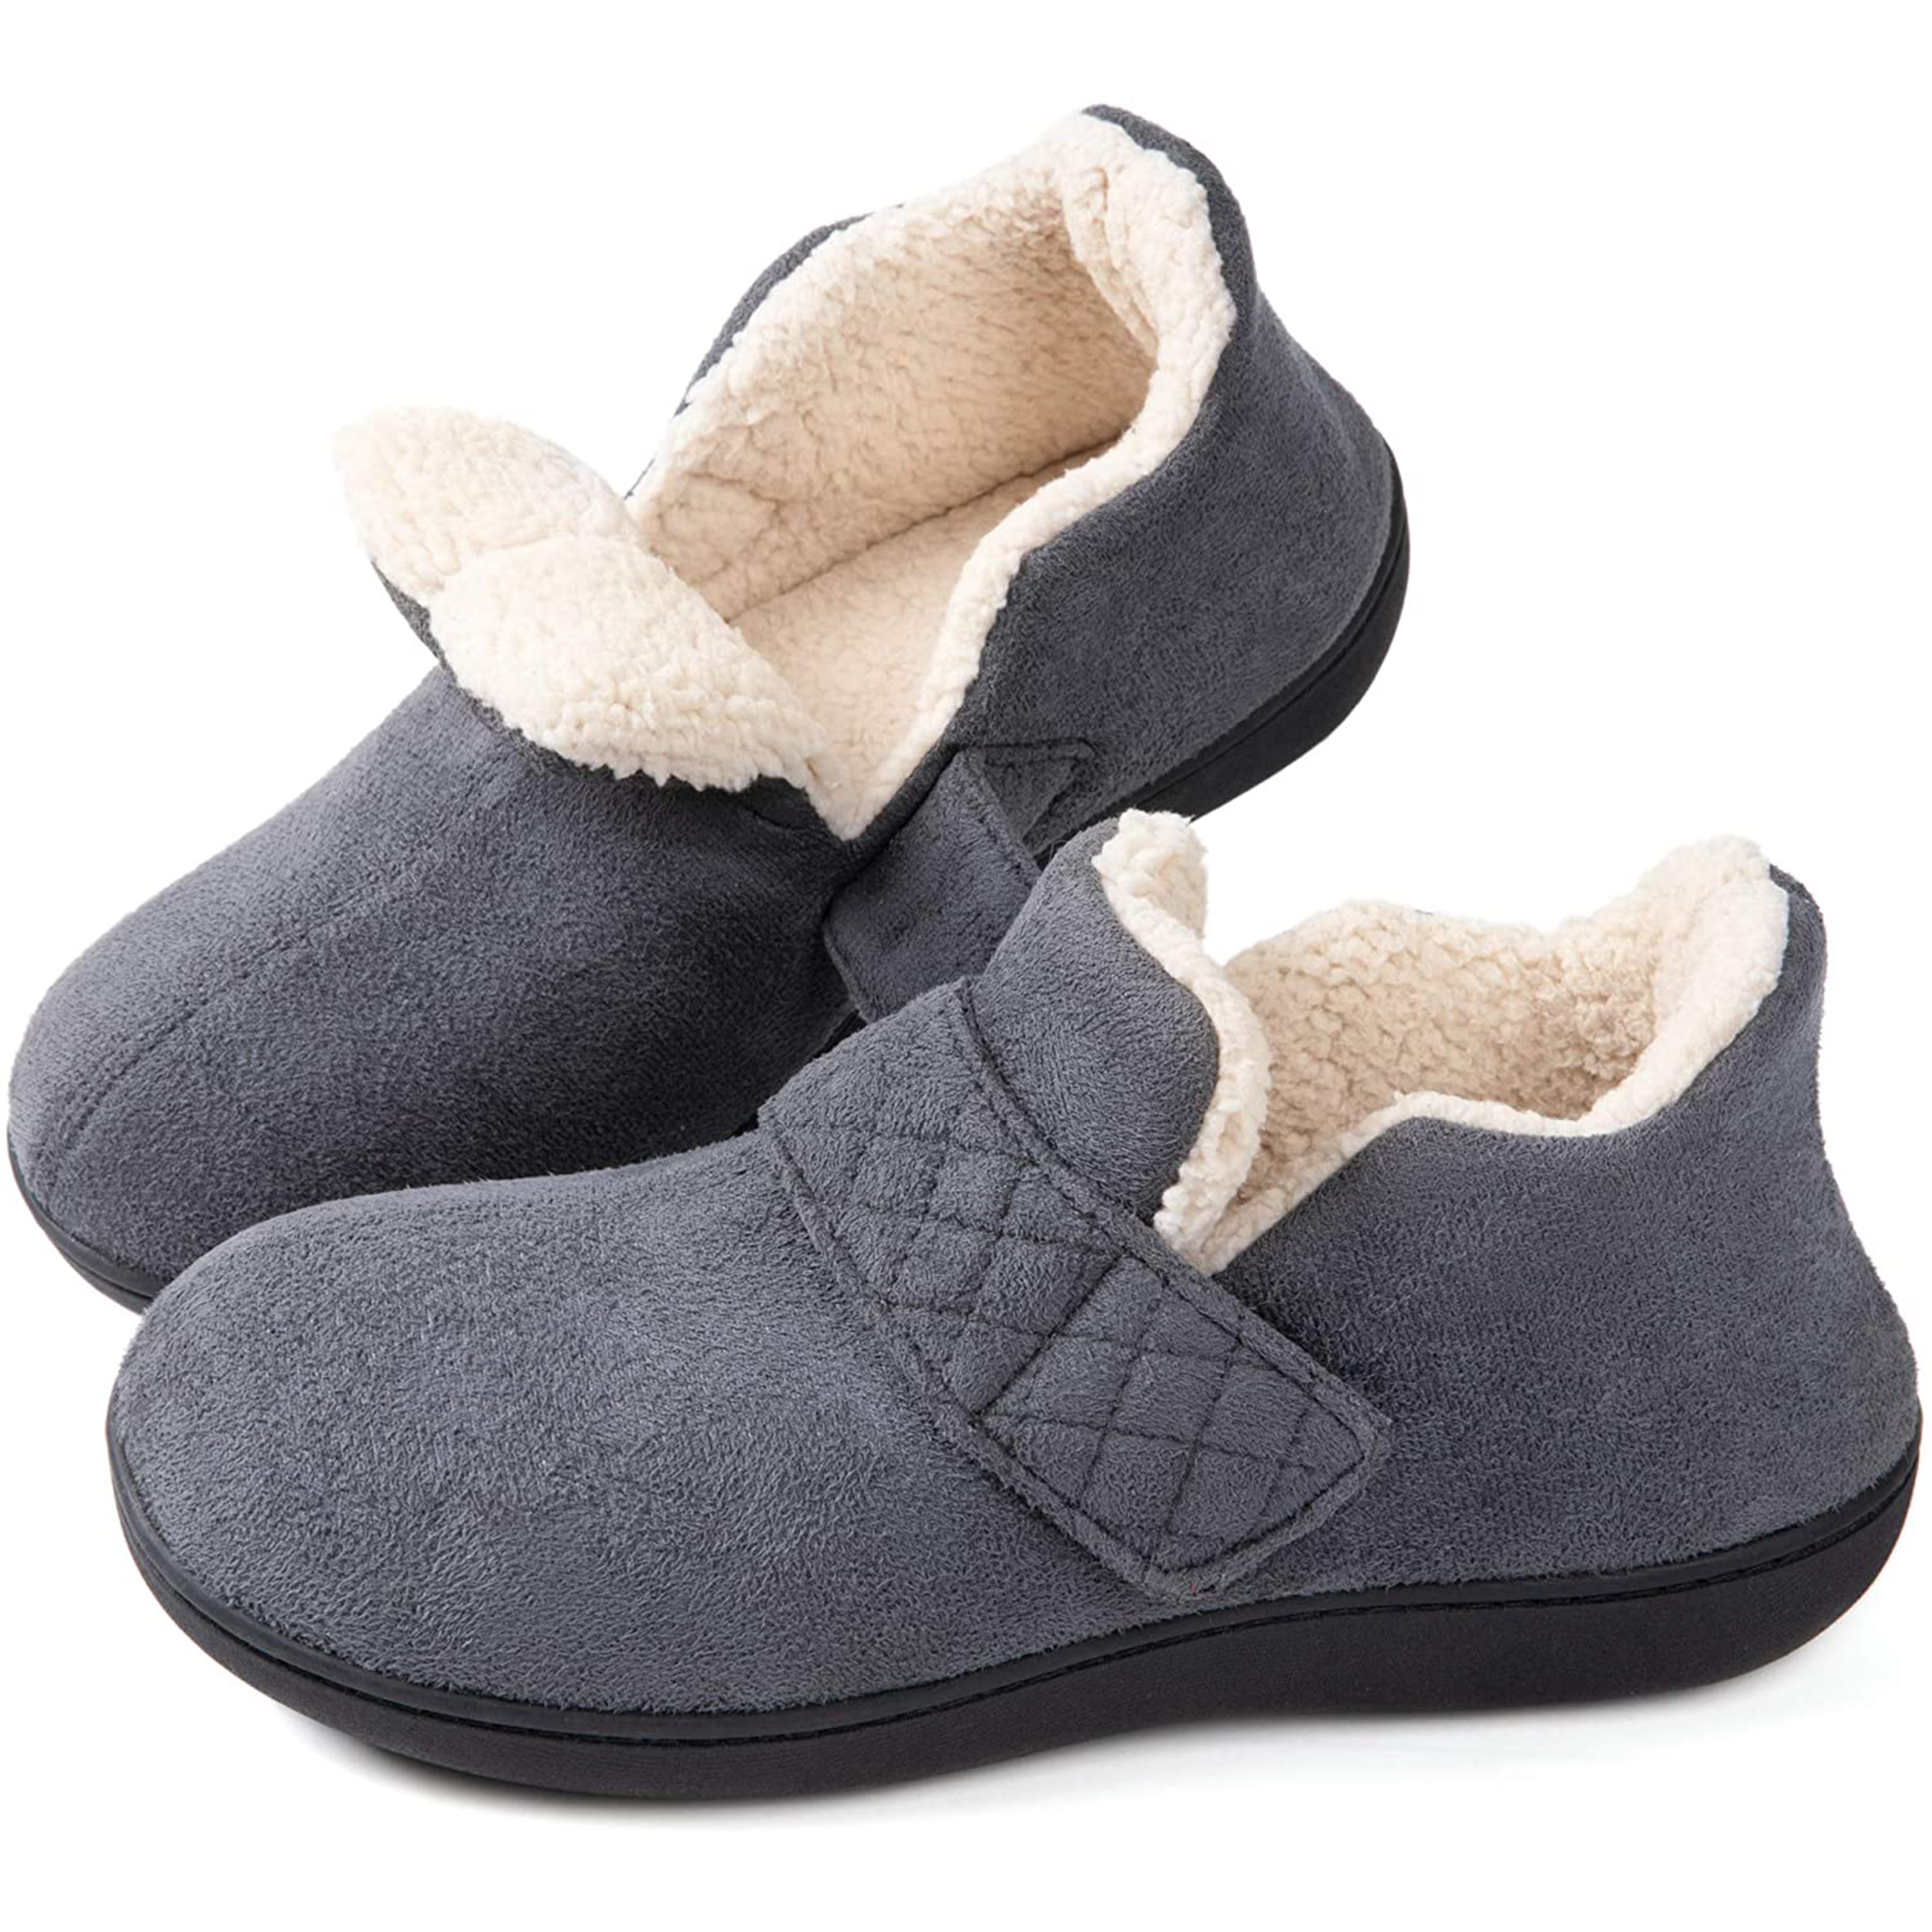 ZIZOR Womens Cozy Memory Foam Slippers with Adjustable Closure Strap Fleece Lining Closed Back House Shoes with Anti-Slip Indoor Outdoor Rubber Sole